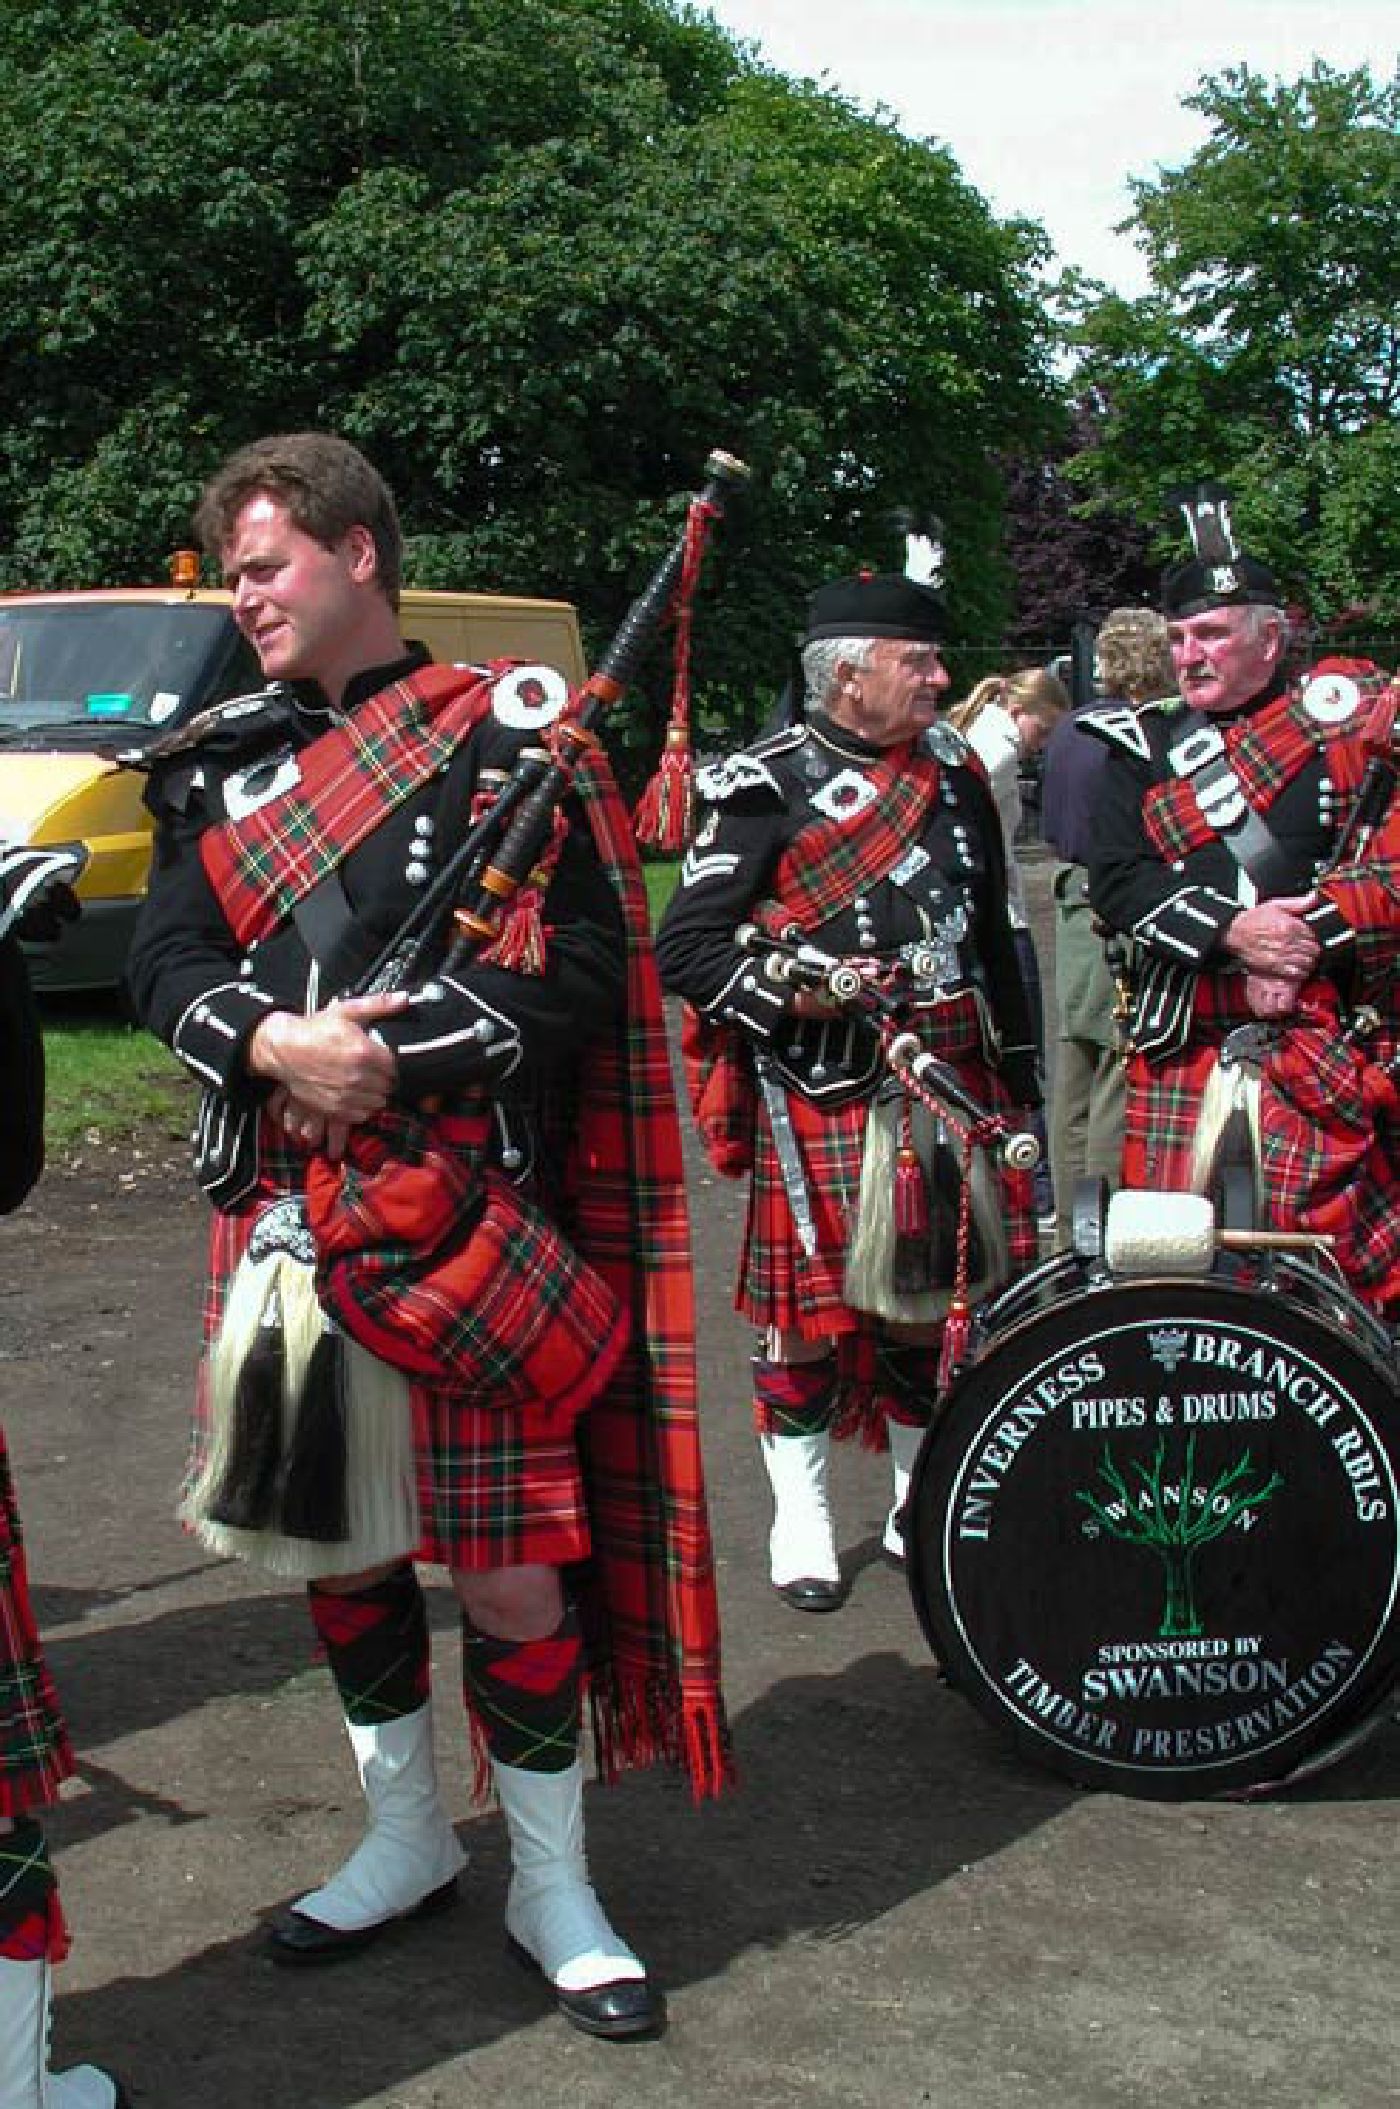 Scottish piper with pipe band